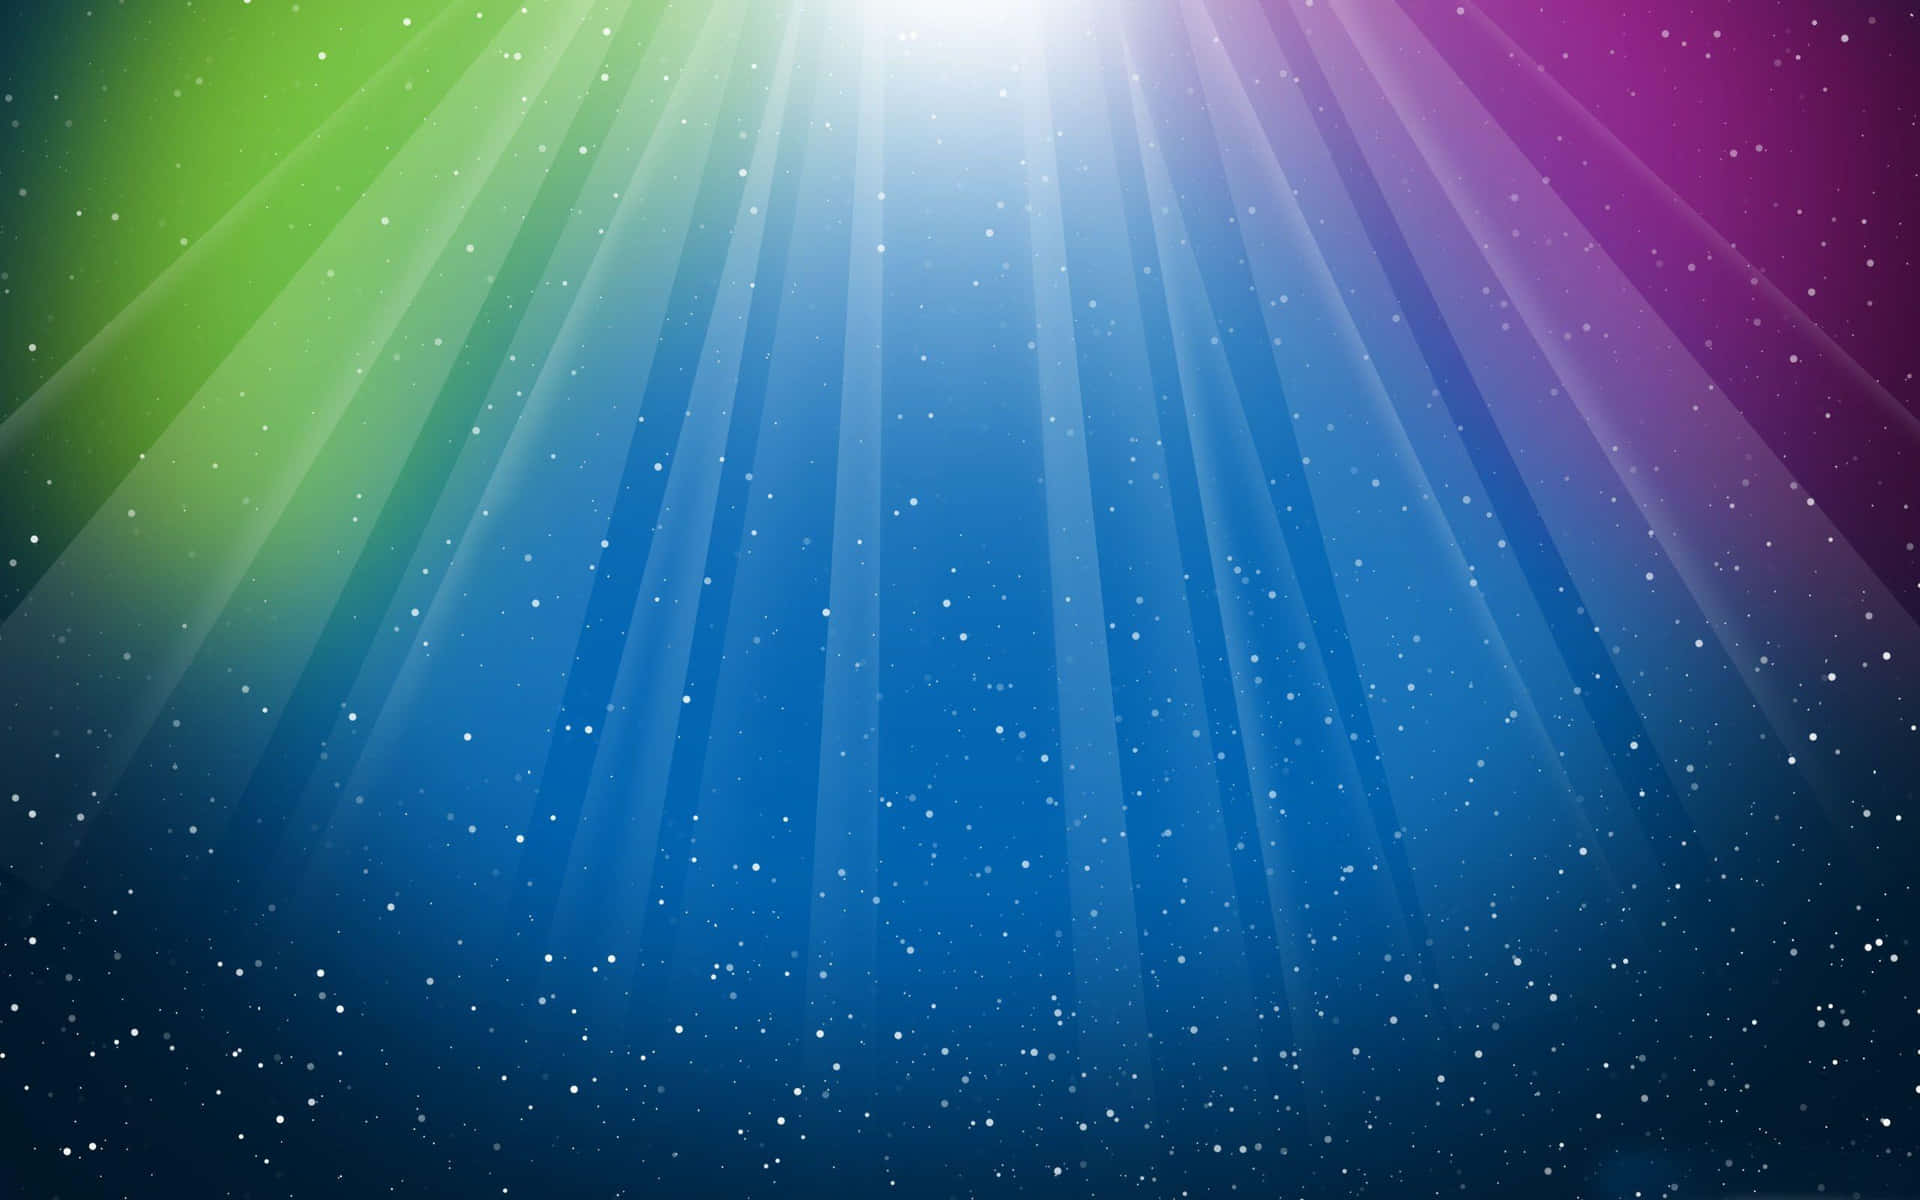 A Colorful Background With Rays Of Light